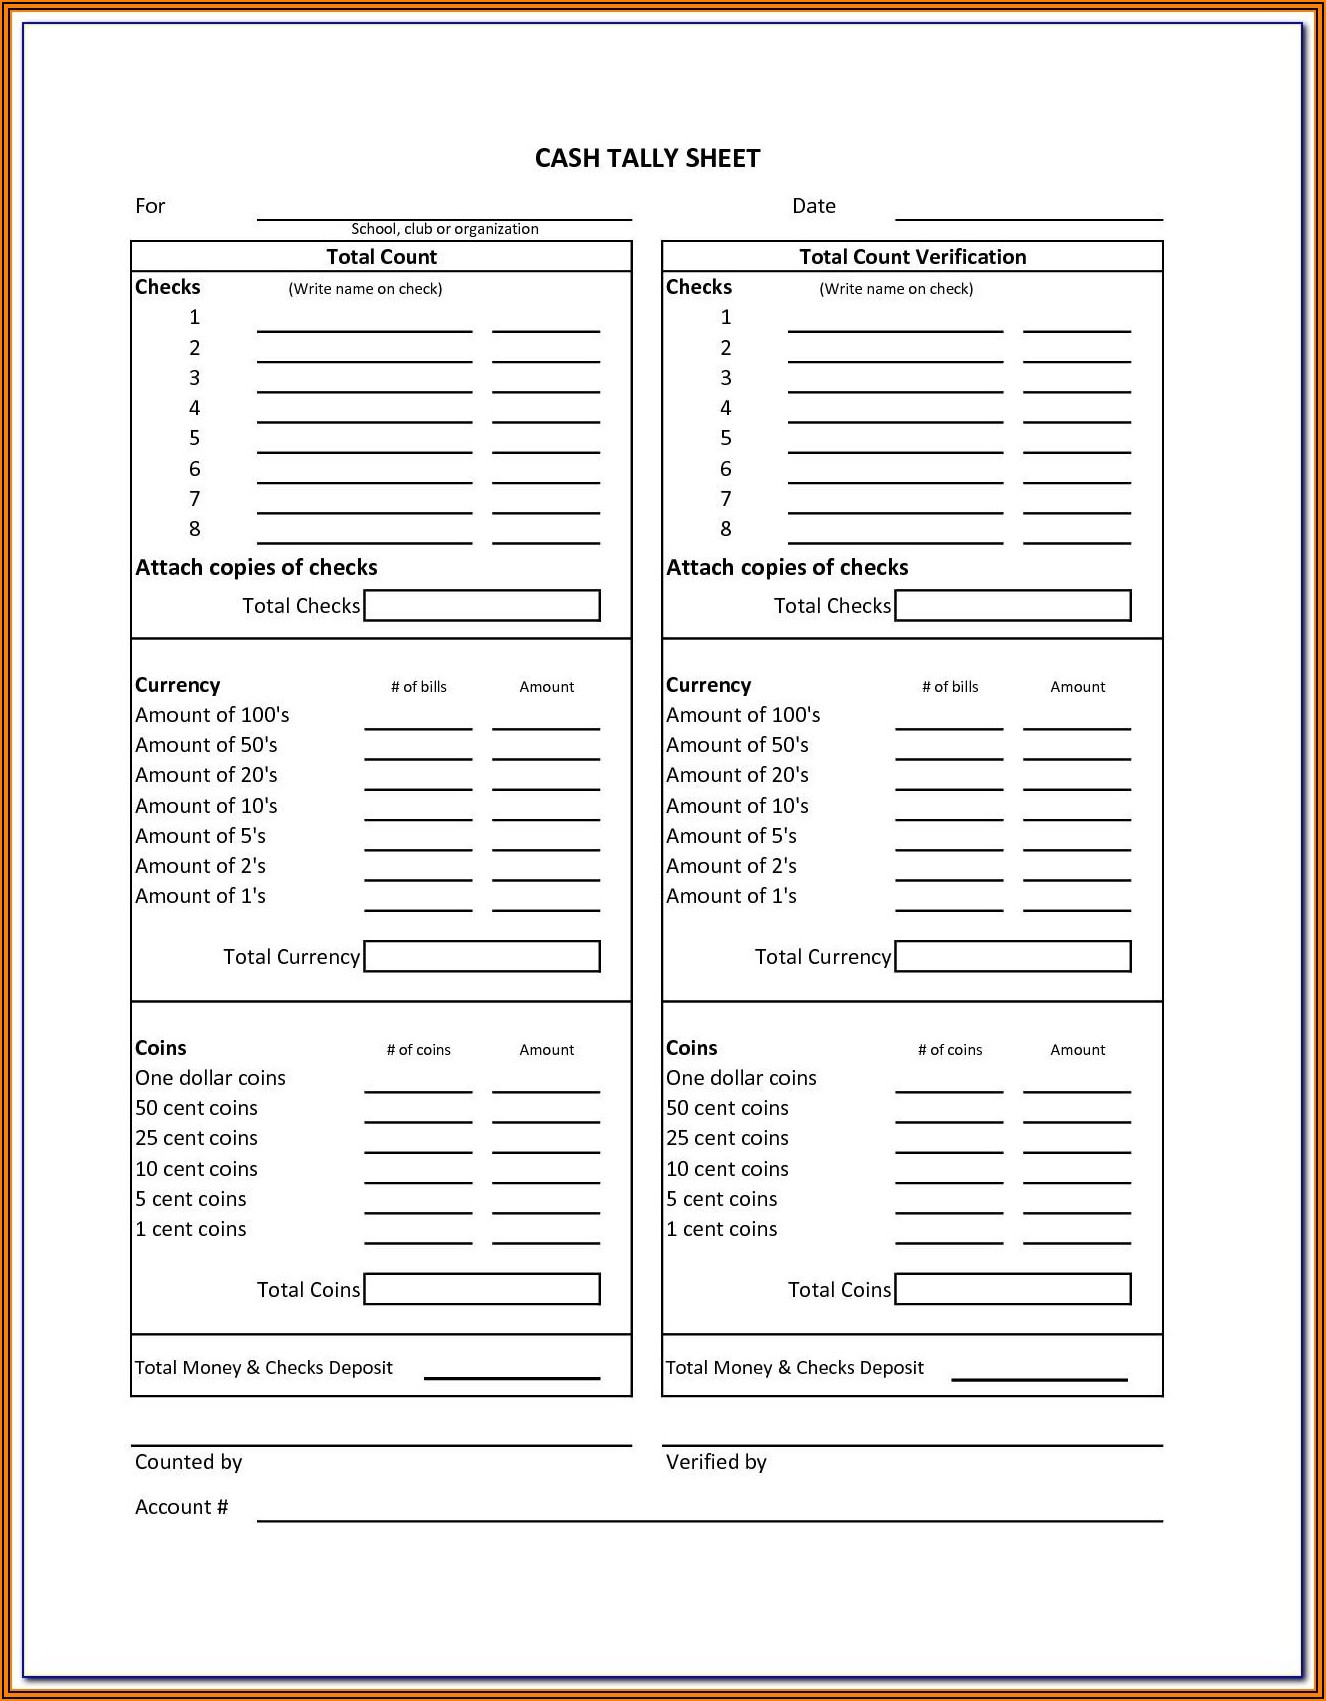 Daily Cash Drawer Reconciliation Form